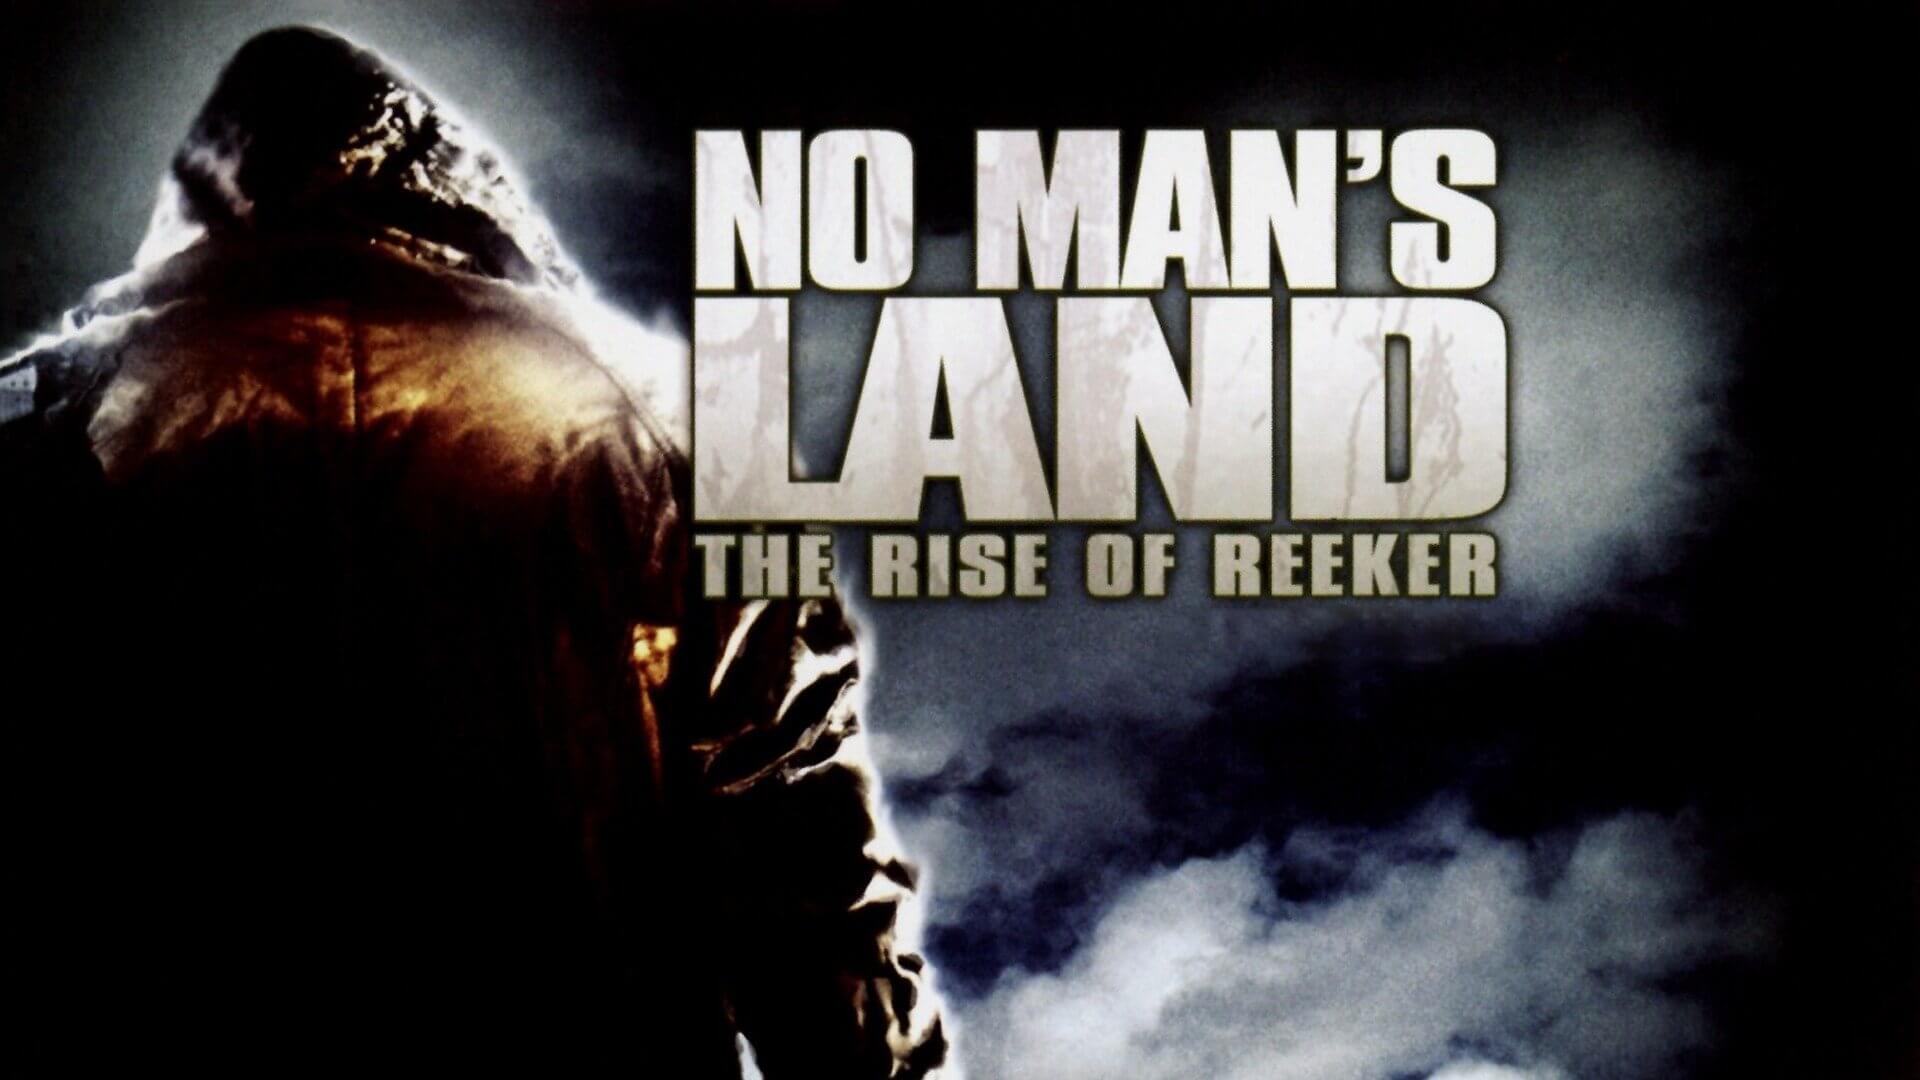 No Man's Land: The Rise of Reeker (Τo σάπιο 2) Review